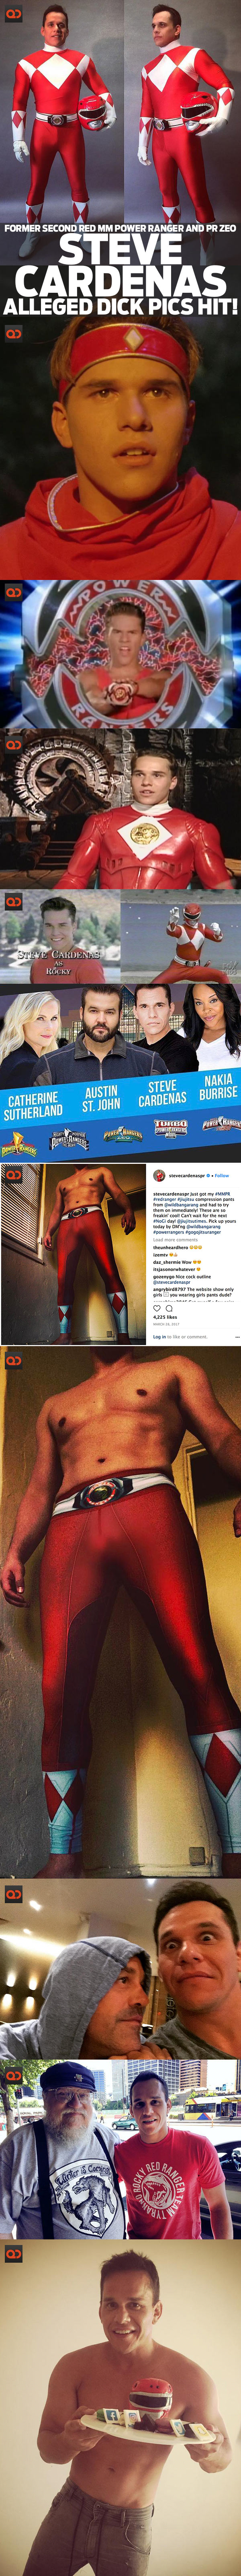 Steve Cardenas, Former Second Red M.M. Power Ranger And PR Zeo, Alleged Dick Pics Hit!